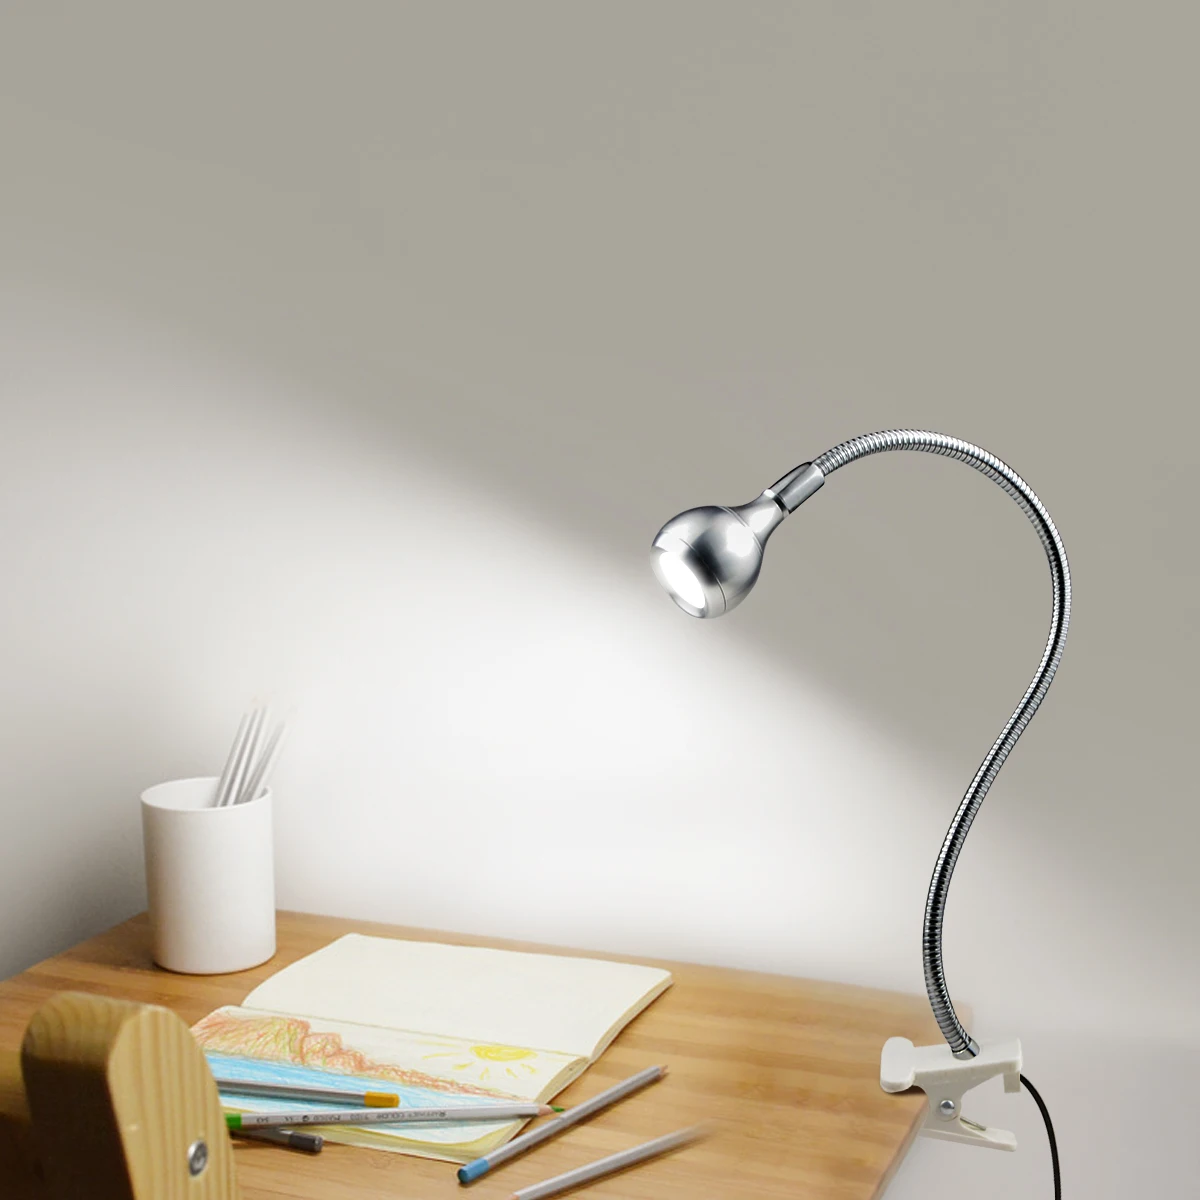 Amp reading book light with holder clip flexible table lamp study reading lamps bedside thumb200